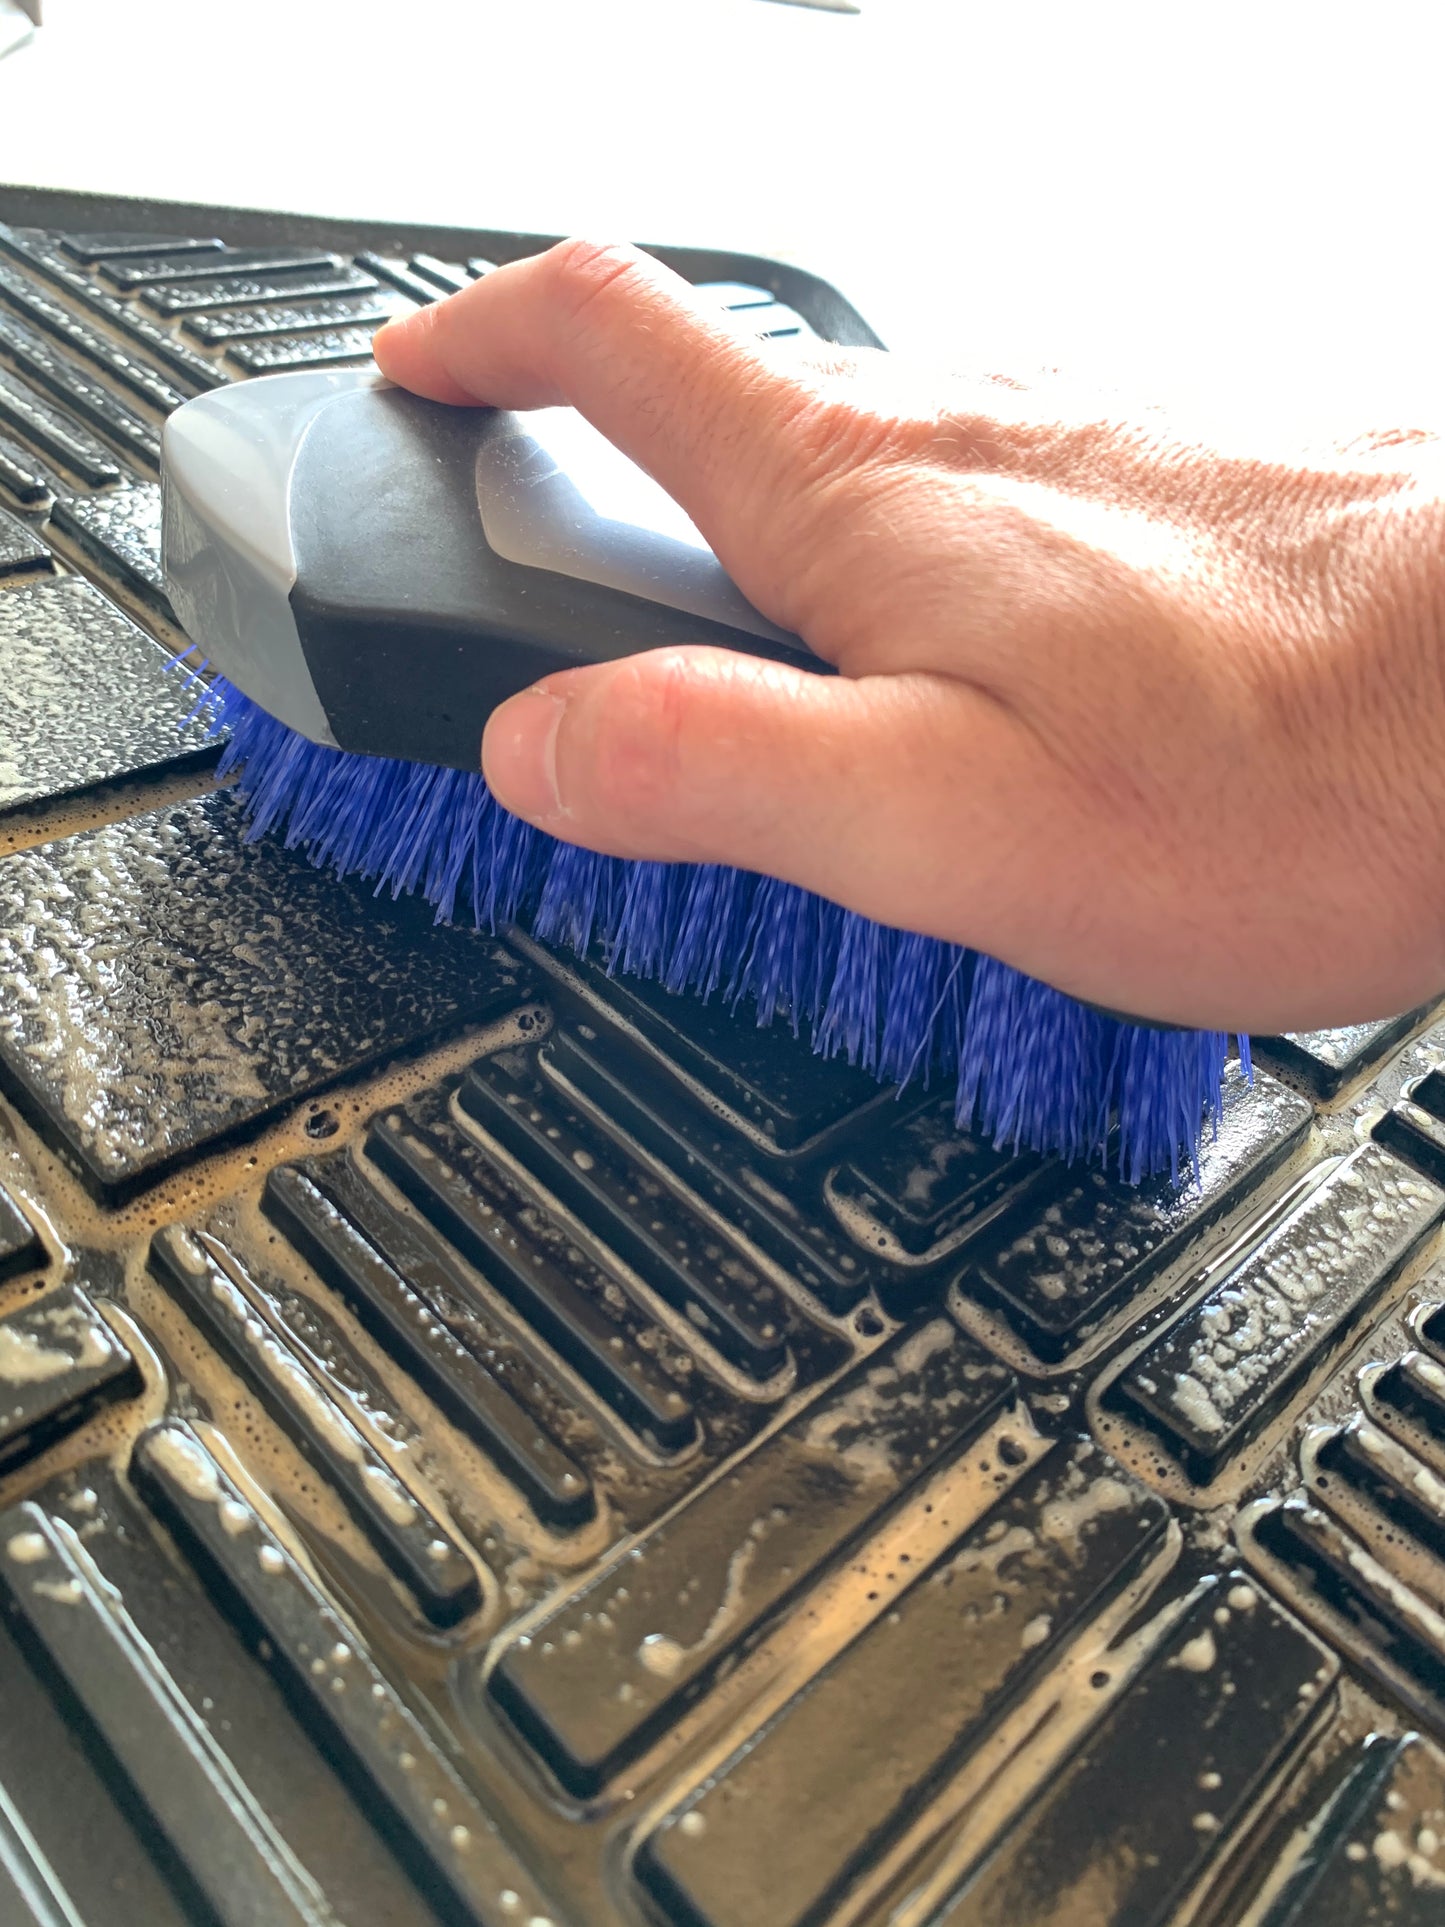 Scrubbing floor mat with Deluxe Carpet and Upholstery Brush